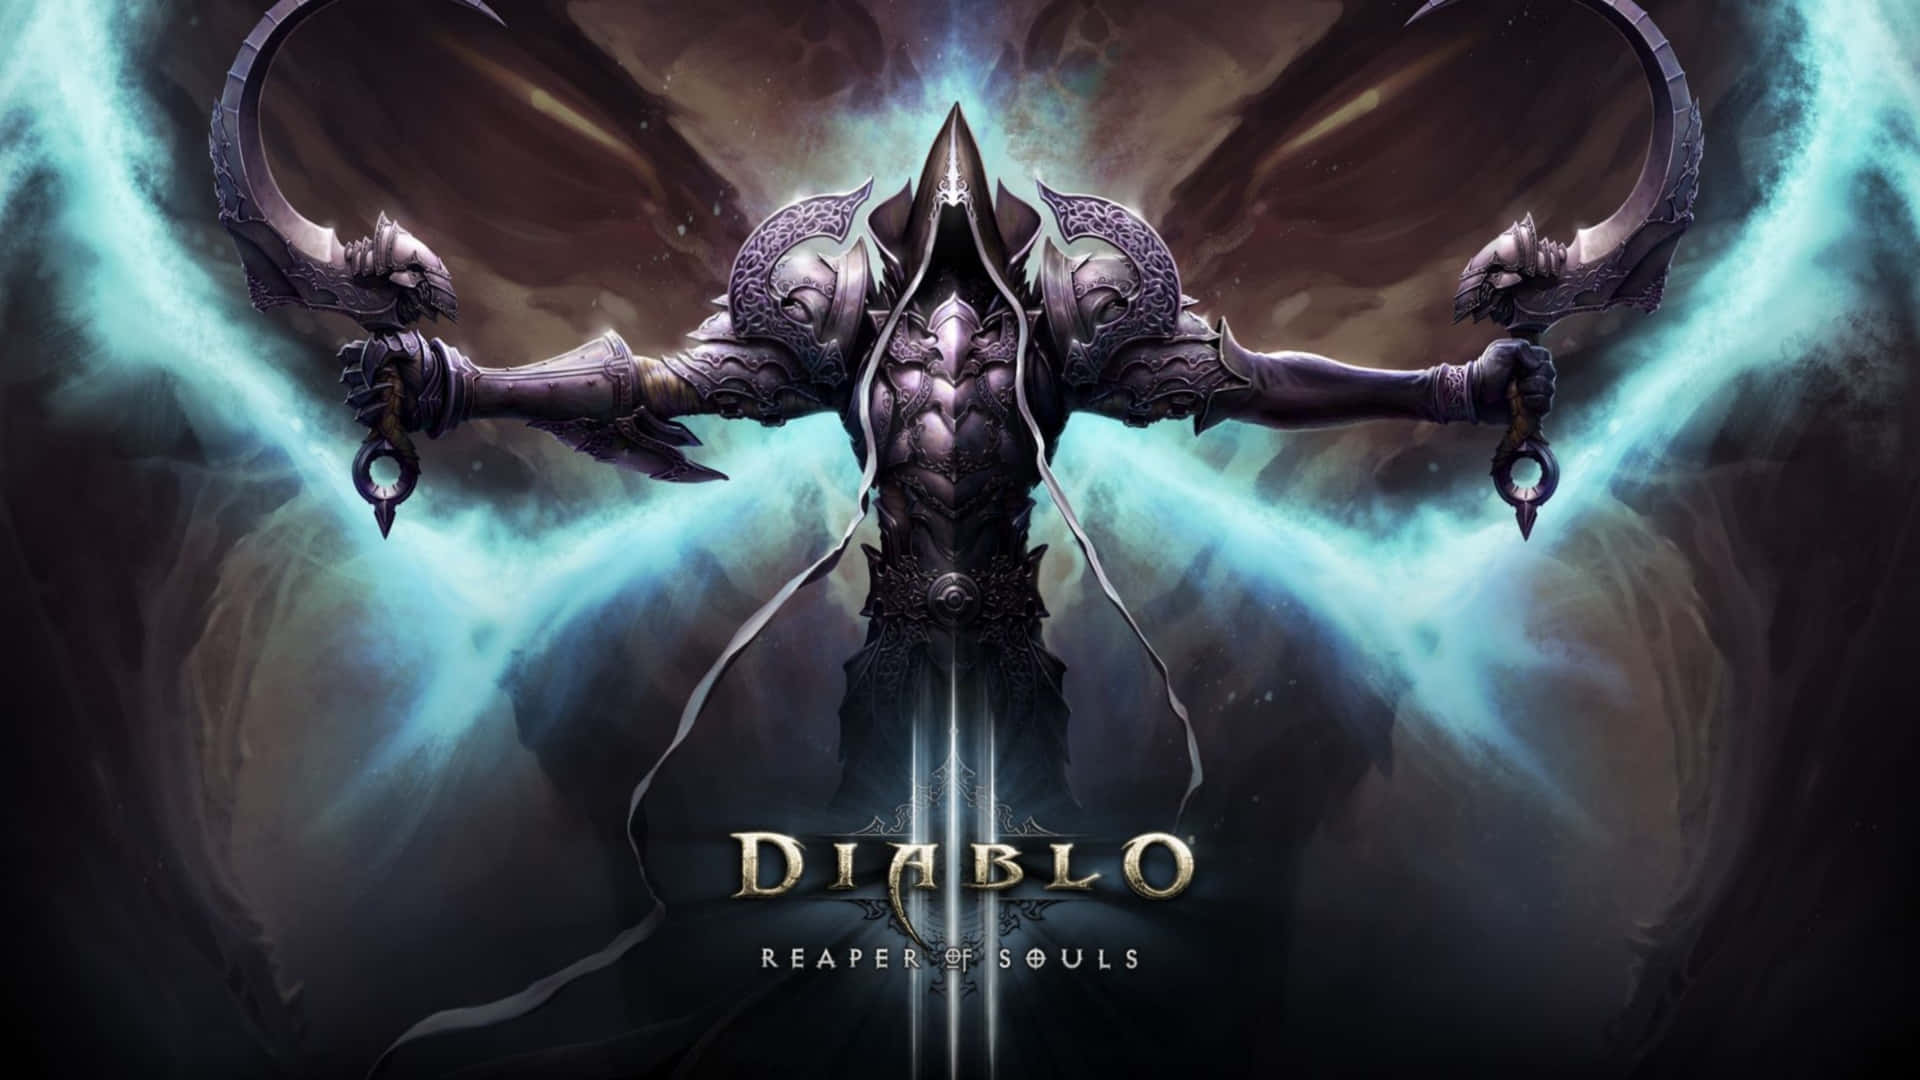 Enter the world of Diablo 4k and experience the adventure Wallpaper